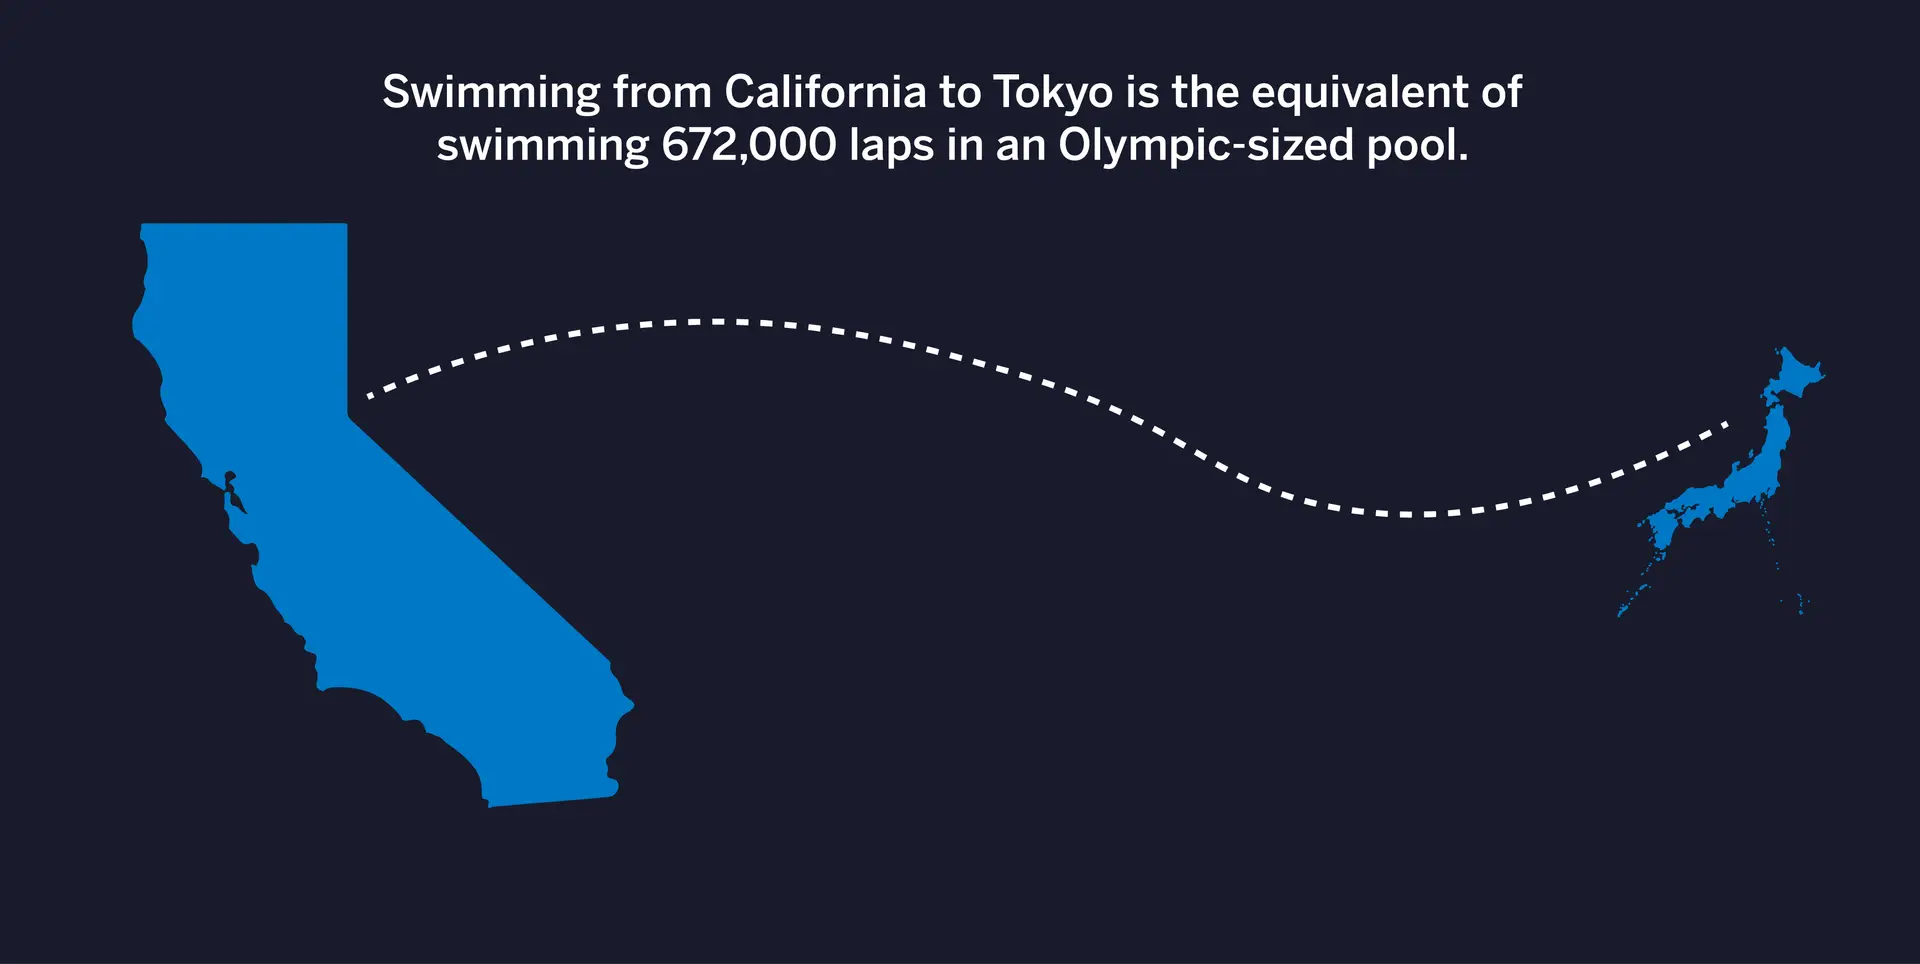 Upper hand – the distance between california and tokyo is equal to 672,000 laps in a pool